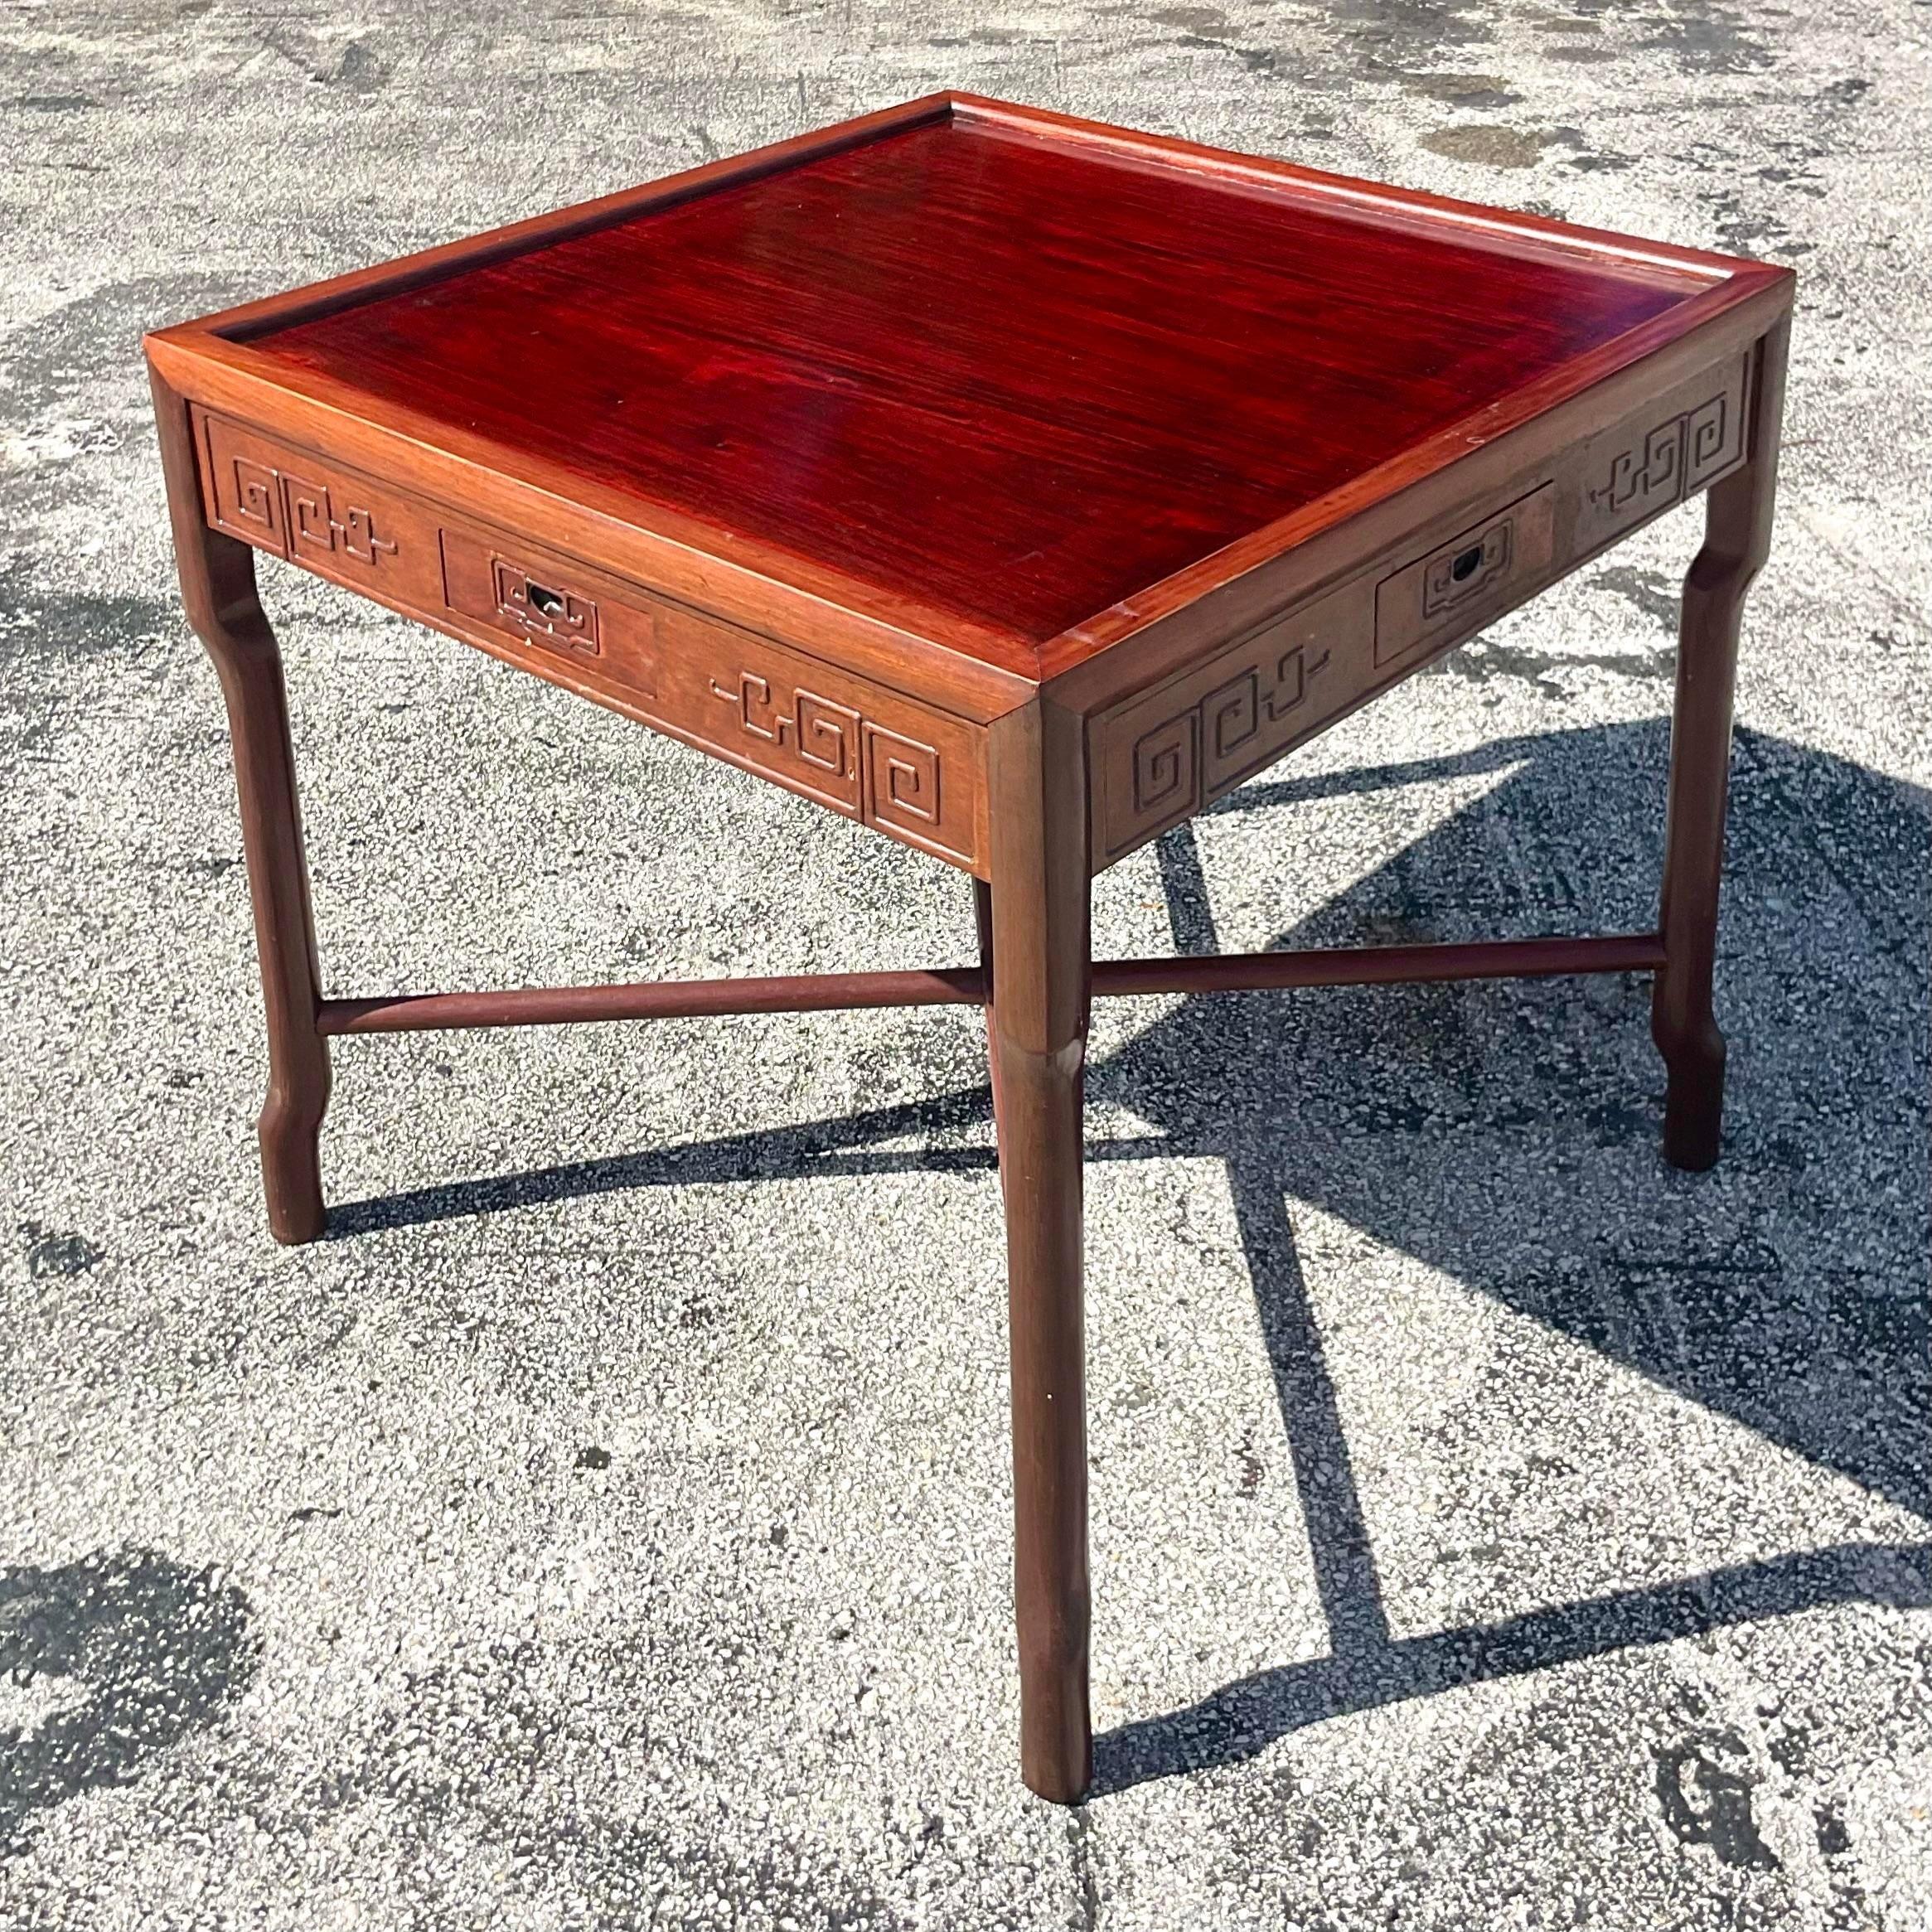 A stunning vintage Asian game table. Gorgeous fretwork detail with individual players drawers on each side. Perfect for your extra aces! Perfect as in or lacquer it a great color to match your project. You decide! Acquired from a Palm Beach estate.